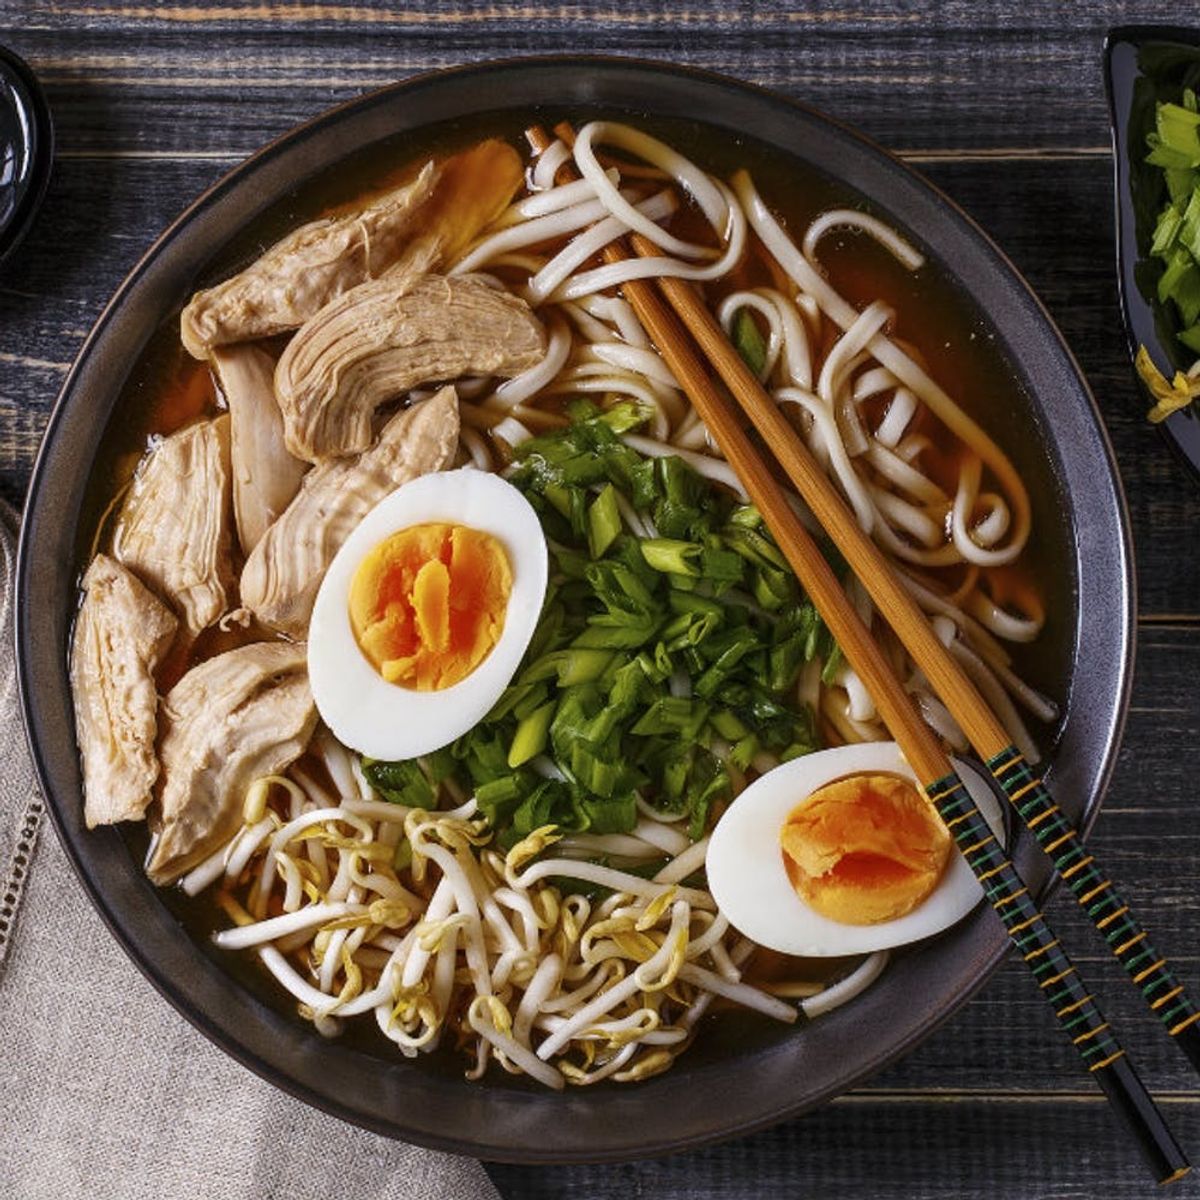 8 Creative Ways to Cook With Super-Healthy Miso